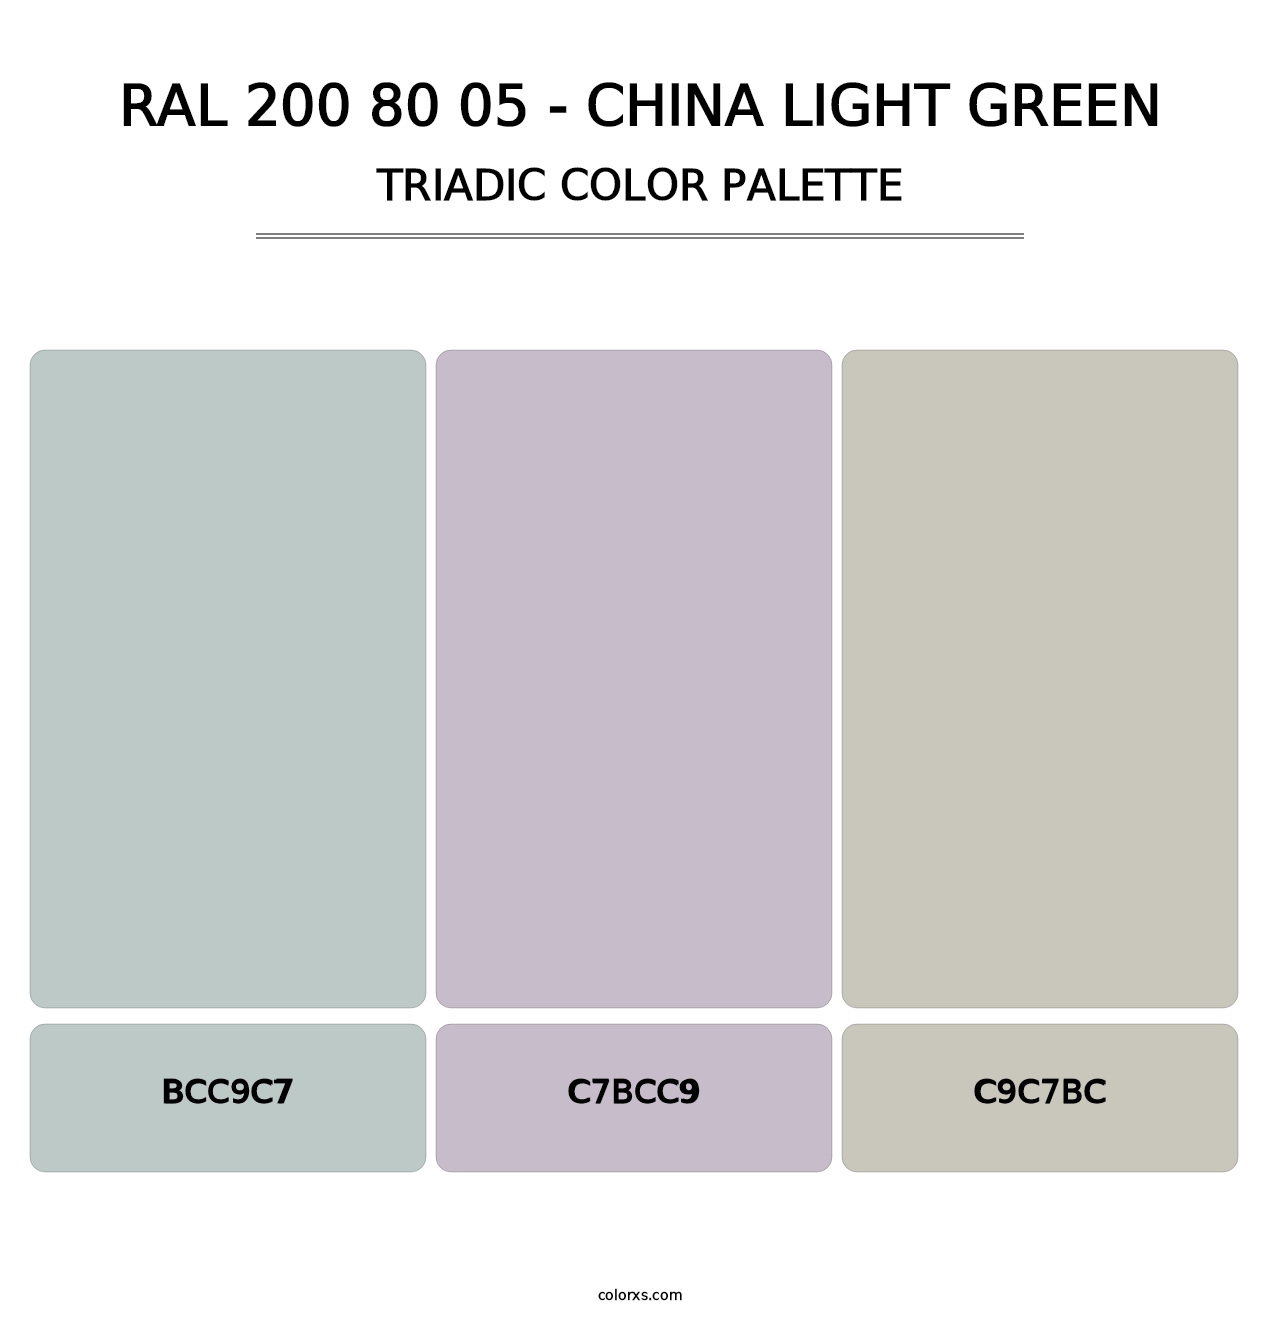 RAL 200 80 05 - China Light Green - Triadic Color Palette